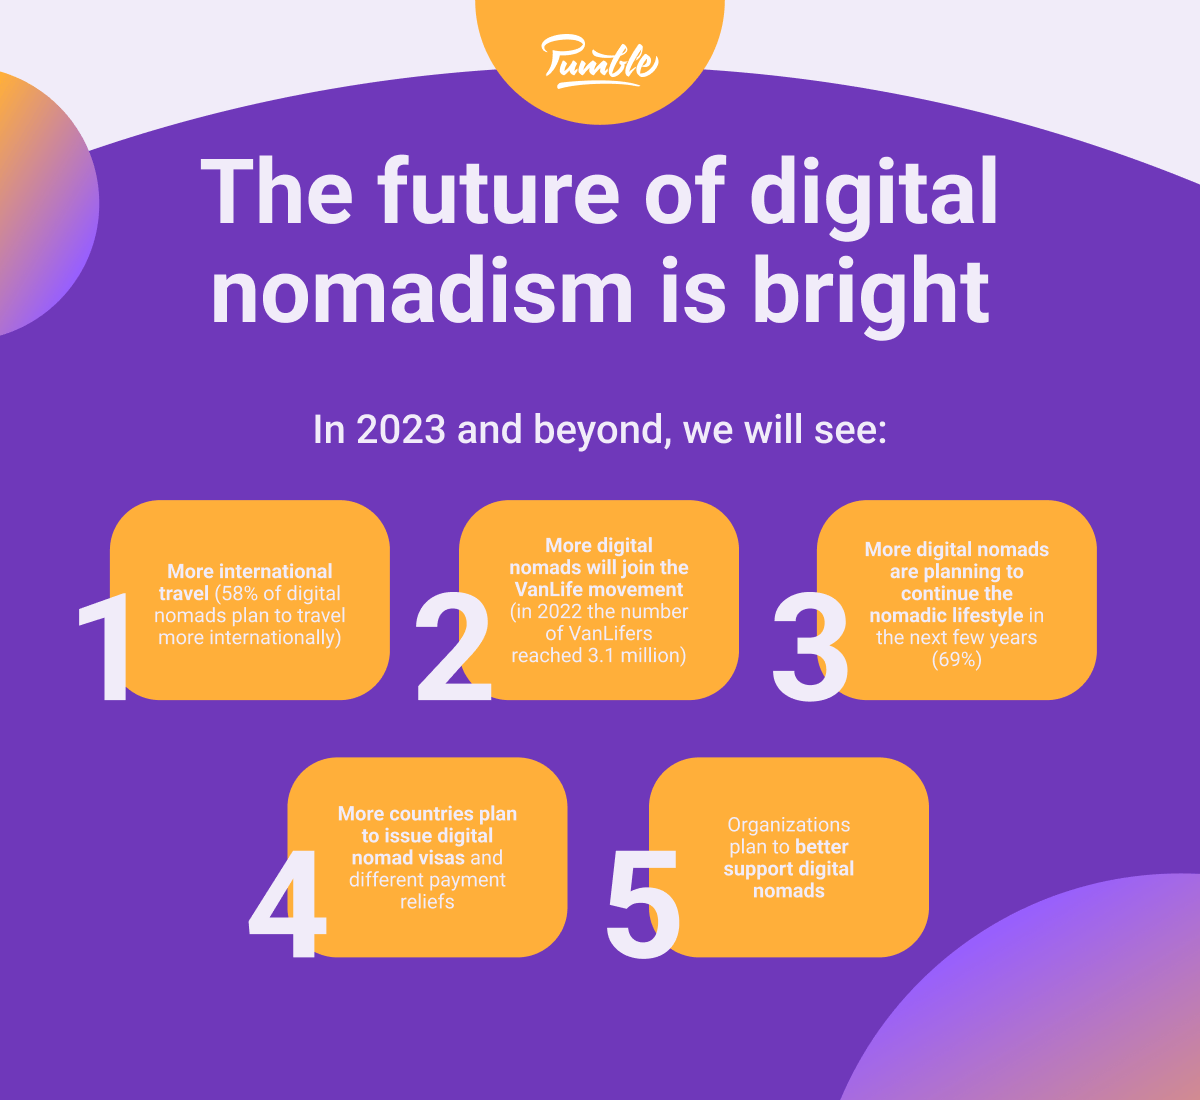 The future of digital nomadism is bright